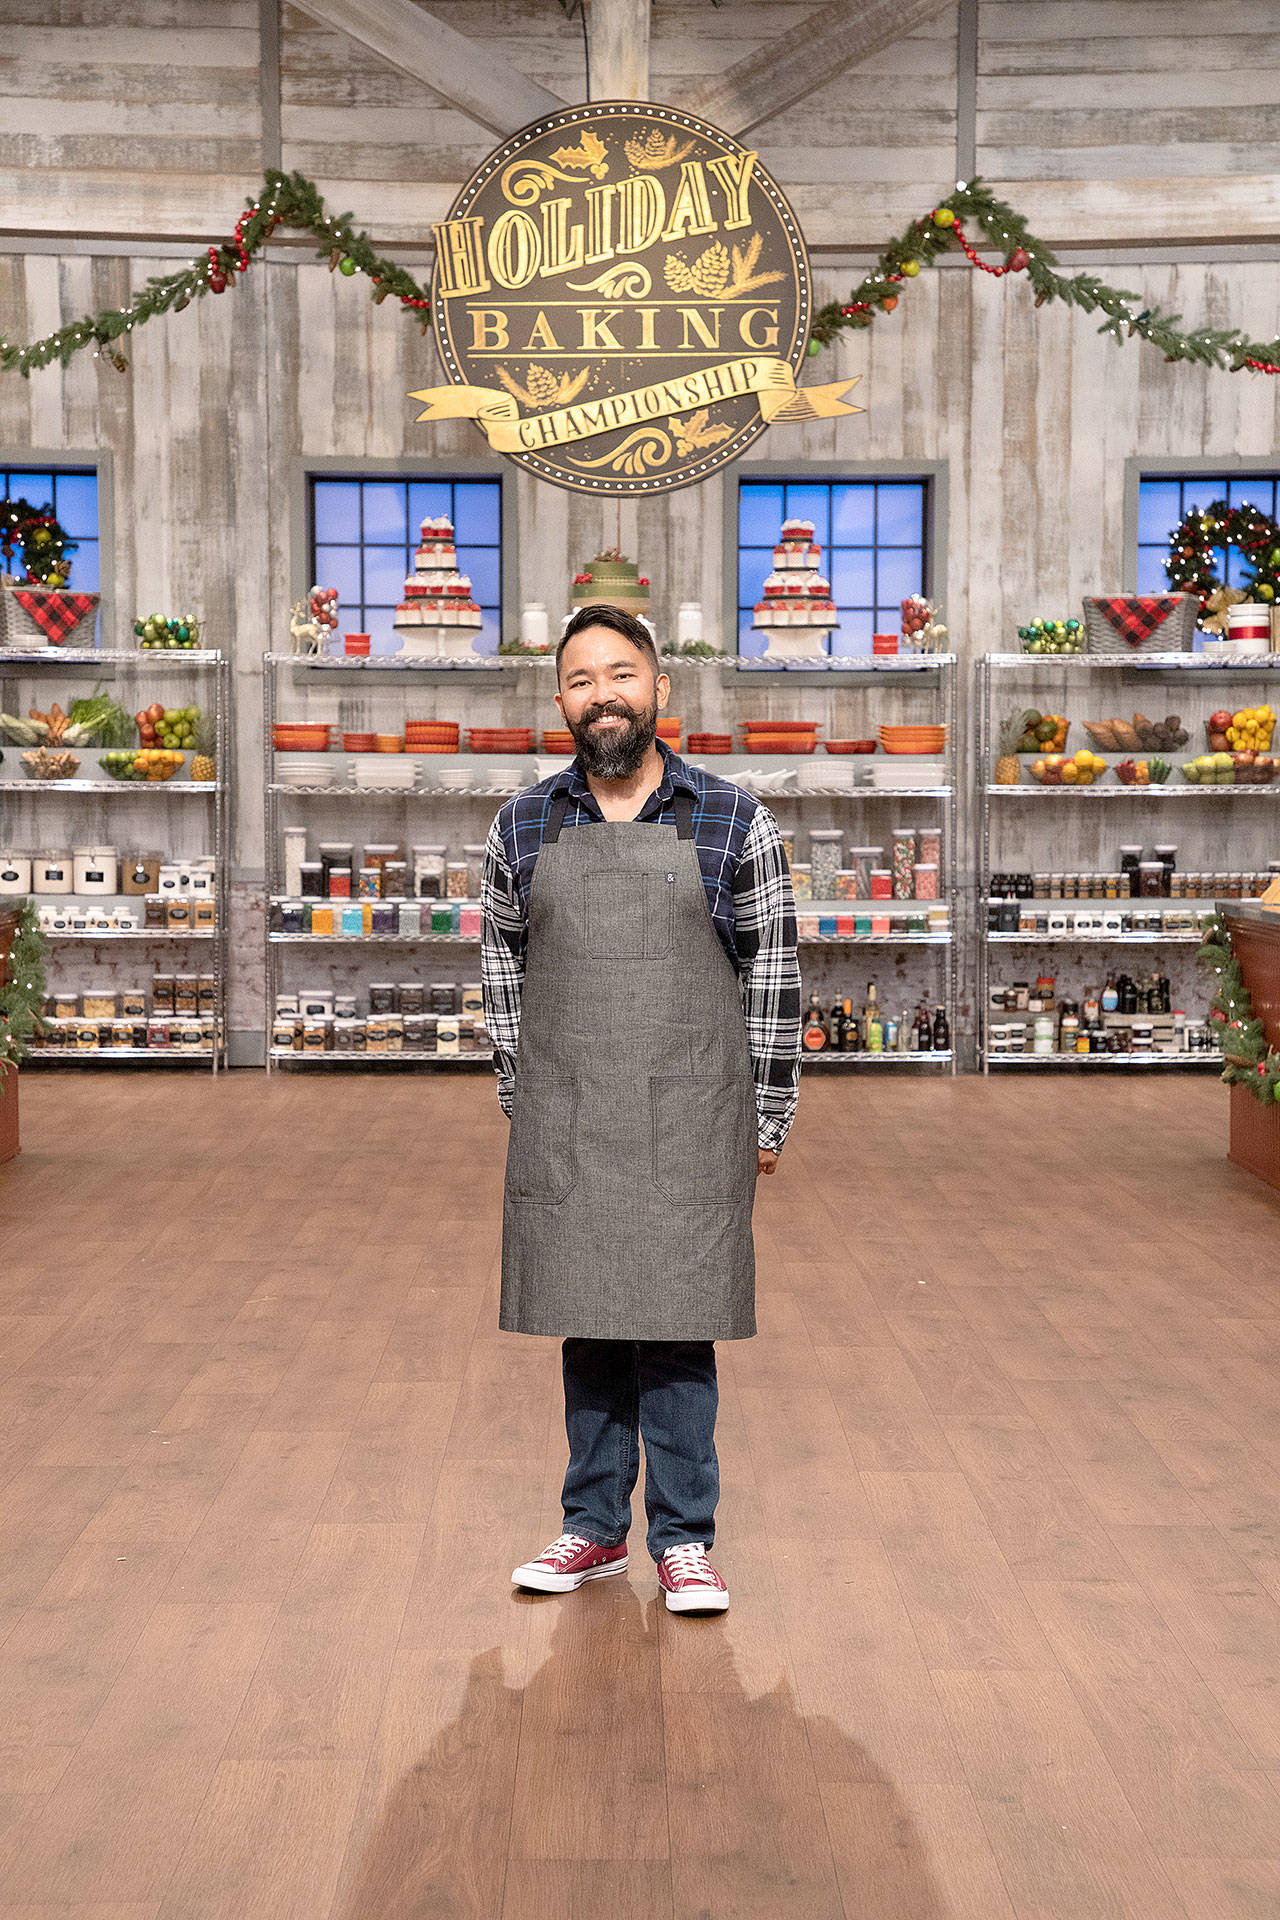 Photo courtesy of Food Network
Oak Harbor High School graduate Jonathan Peregrino stands on the set of TV’s Holiday Baking Championship, premiering Nov. 2.